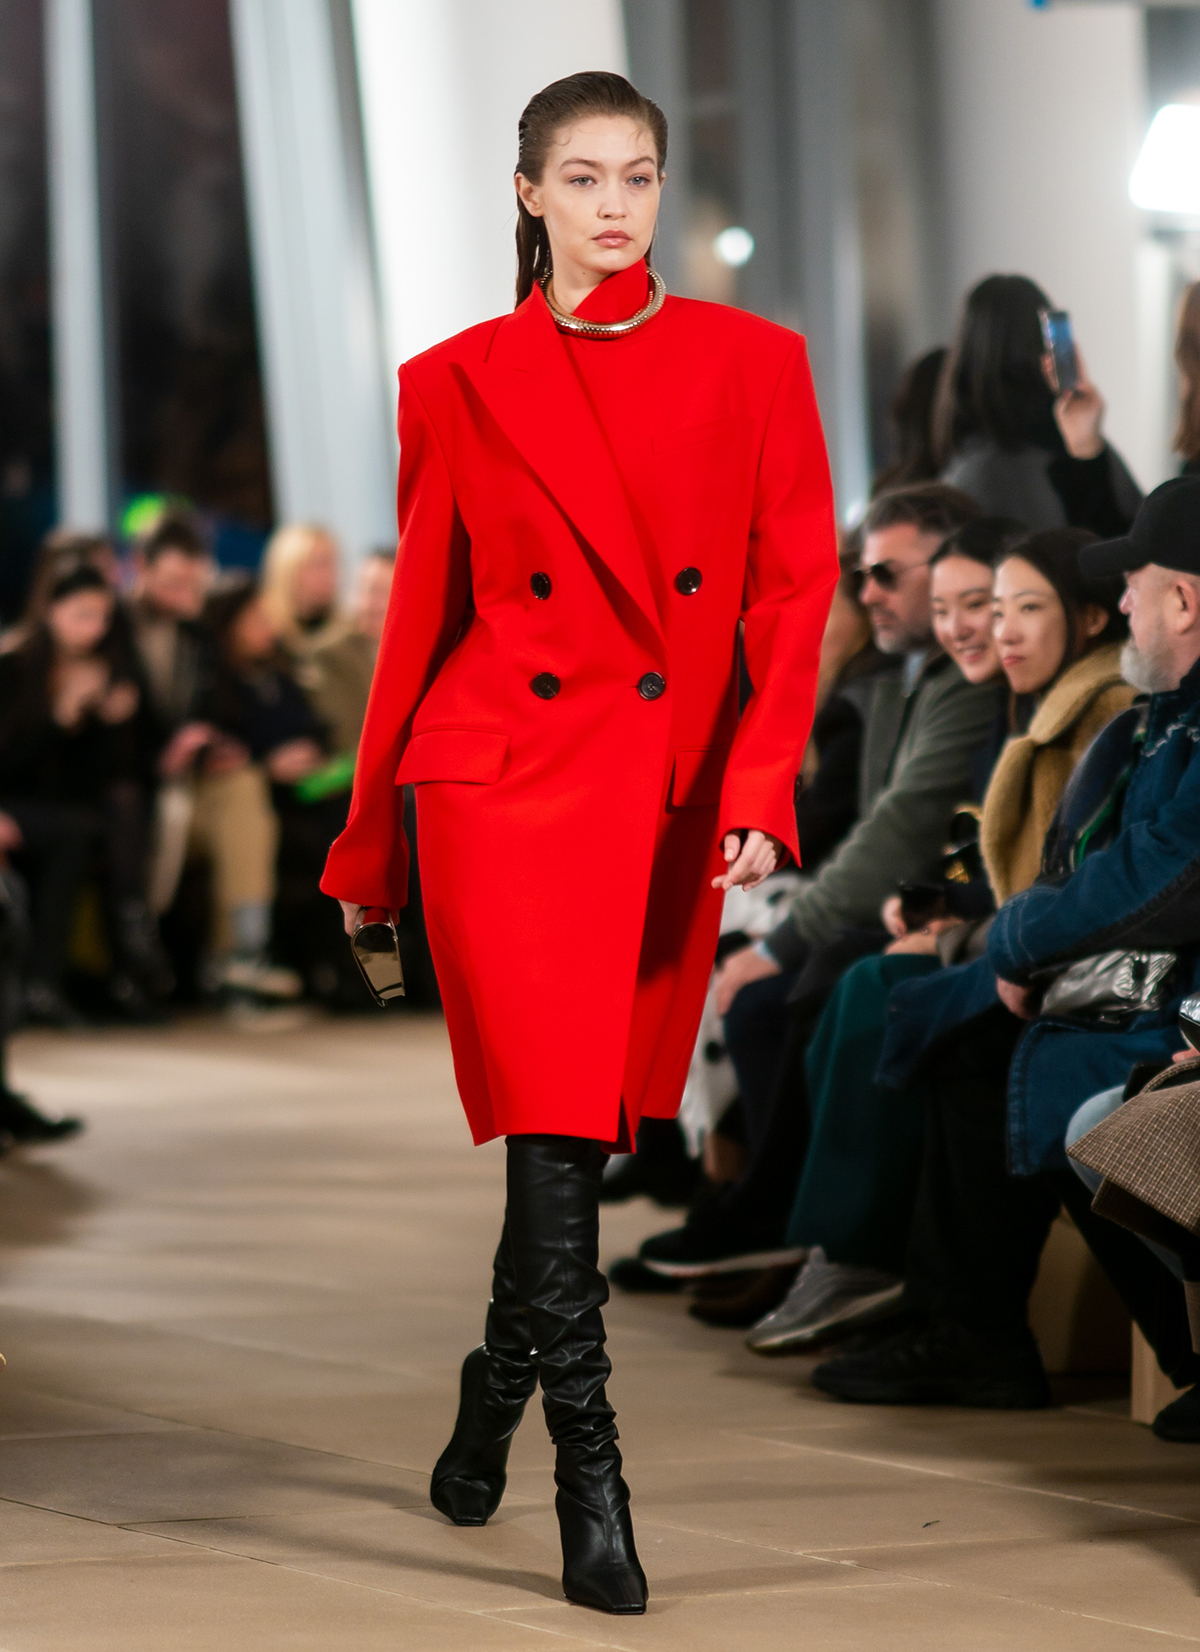 Autumn winter 2020 fashion trends: Gigi Hadid on catwalk in red coat and boots